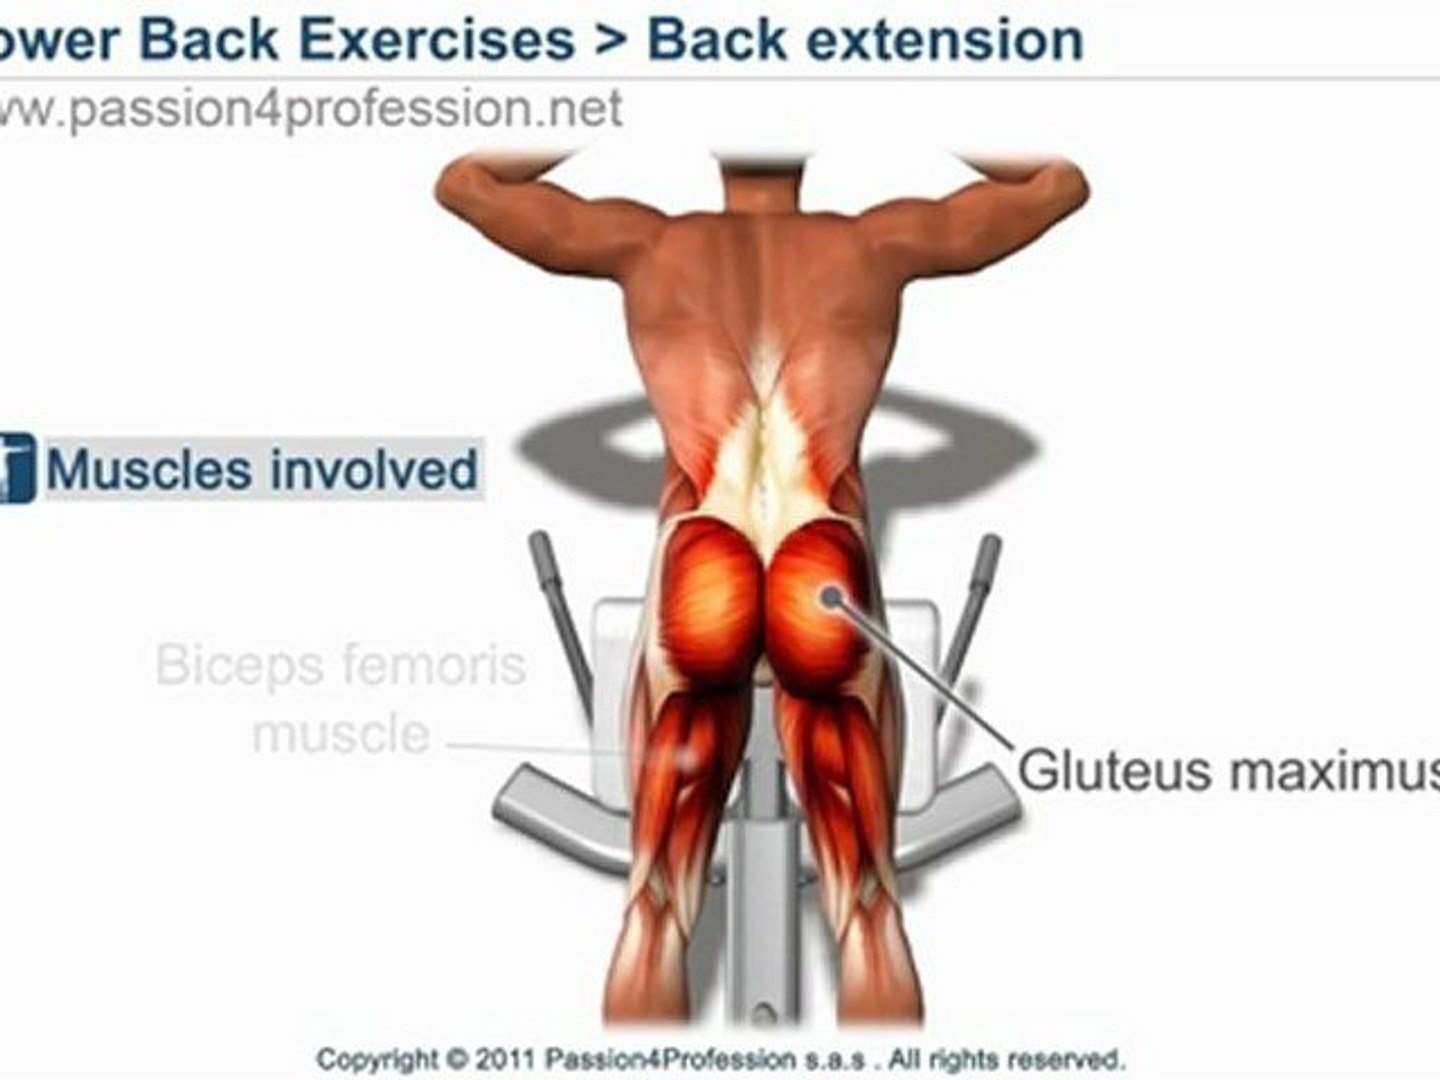 Exercises to Define Lower Back Muscles - SportsRec